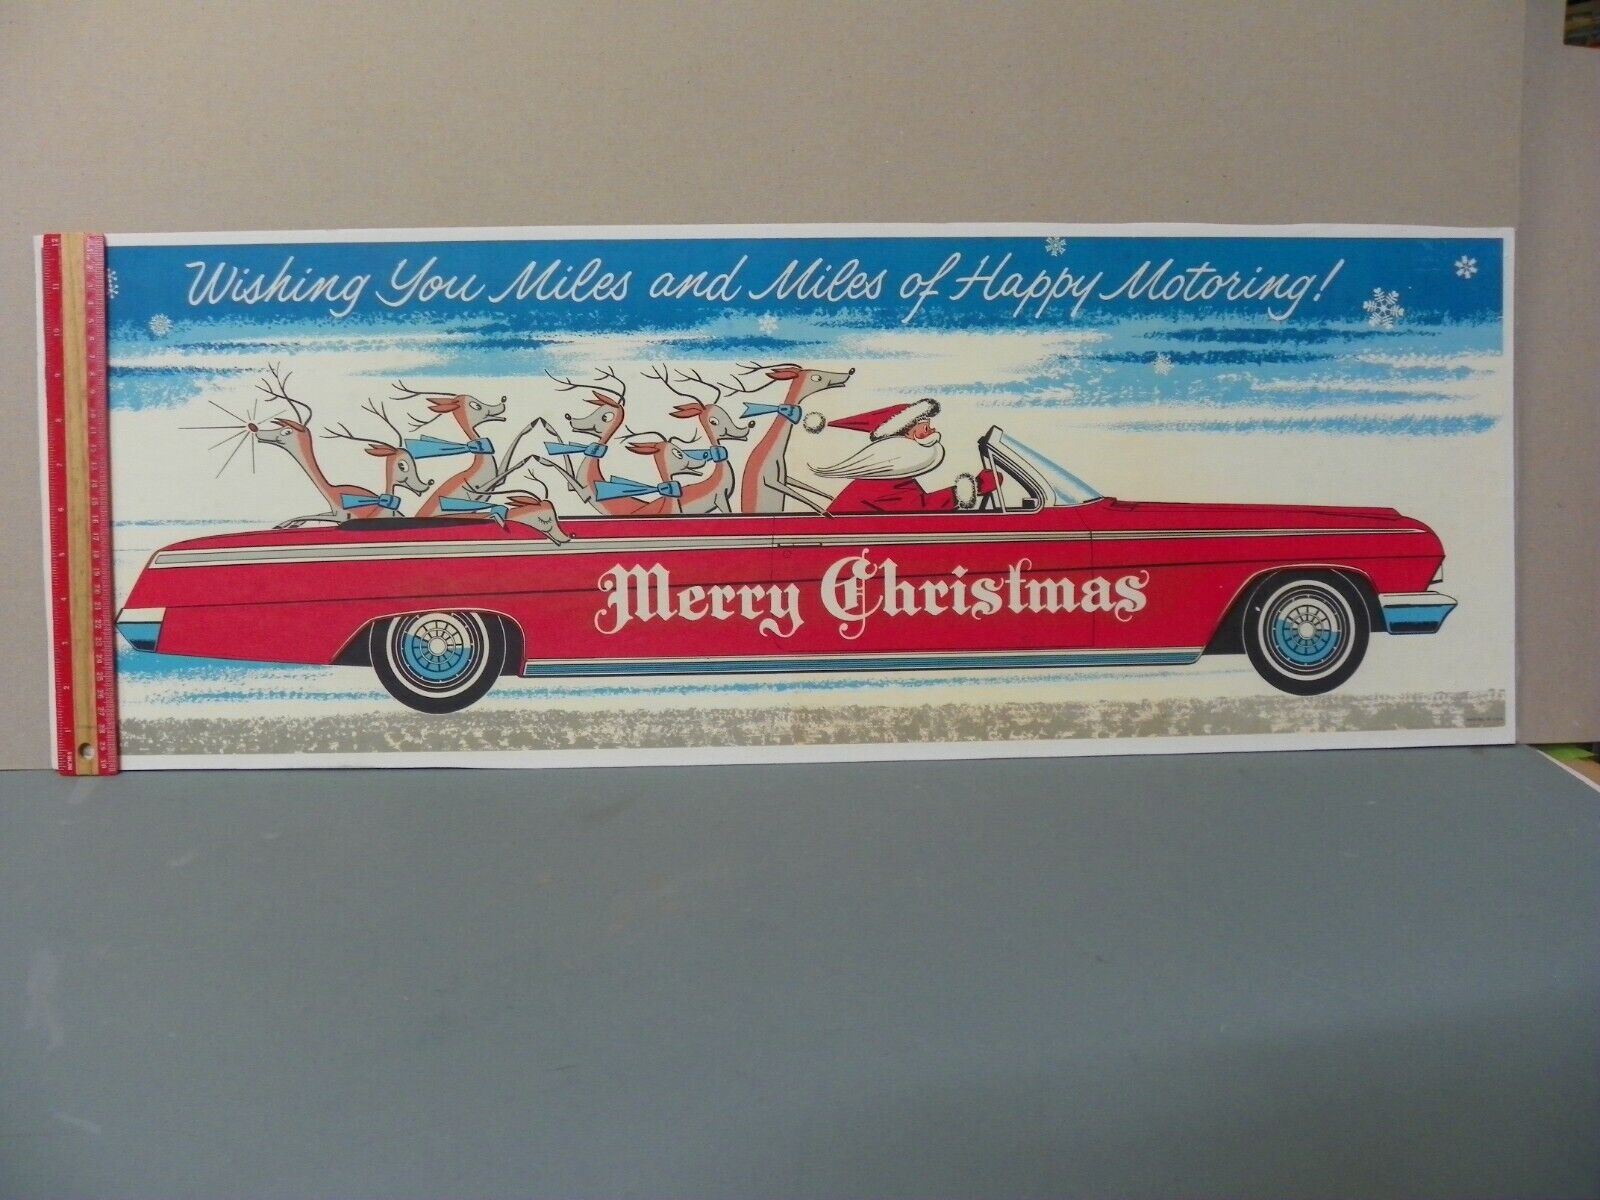 1962 CHEVROLET CHRISTMAS -  DEALER WINDOW DISPLAY - COPY - ABOUT 3FT WIDE